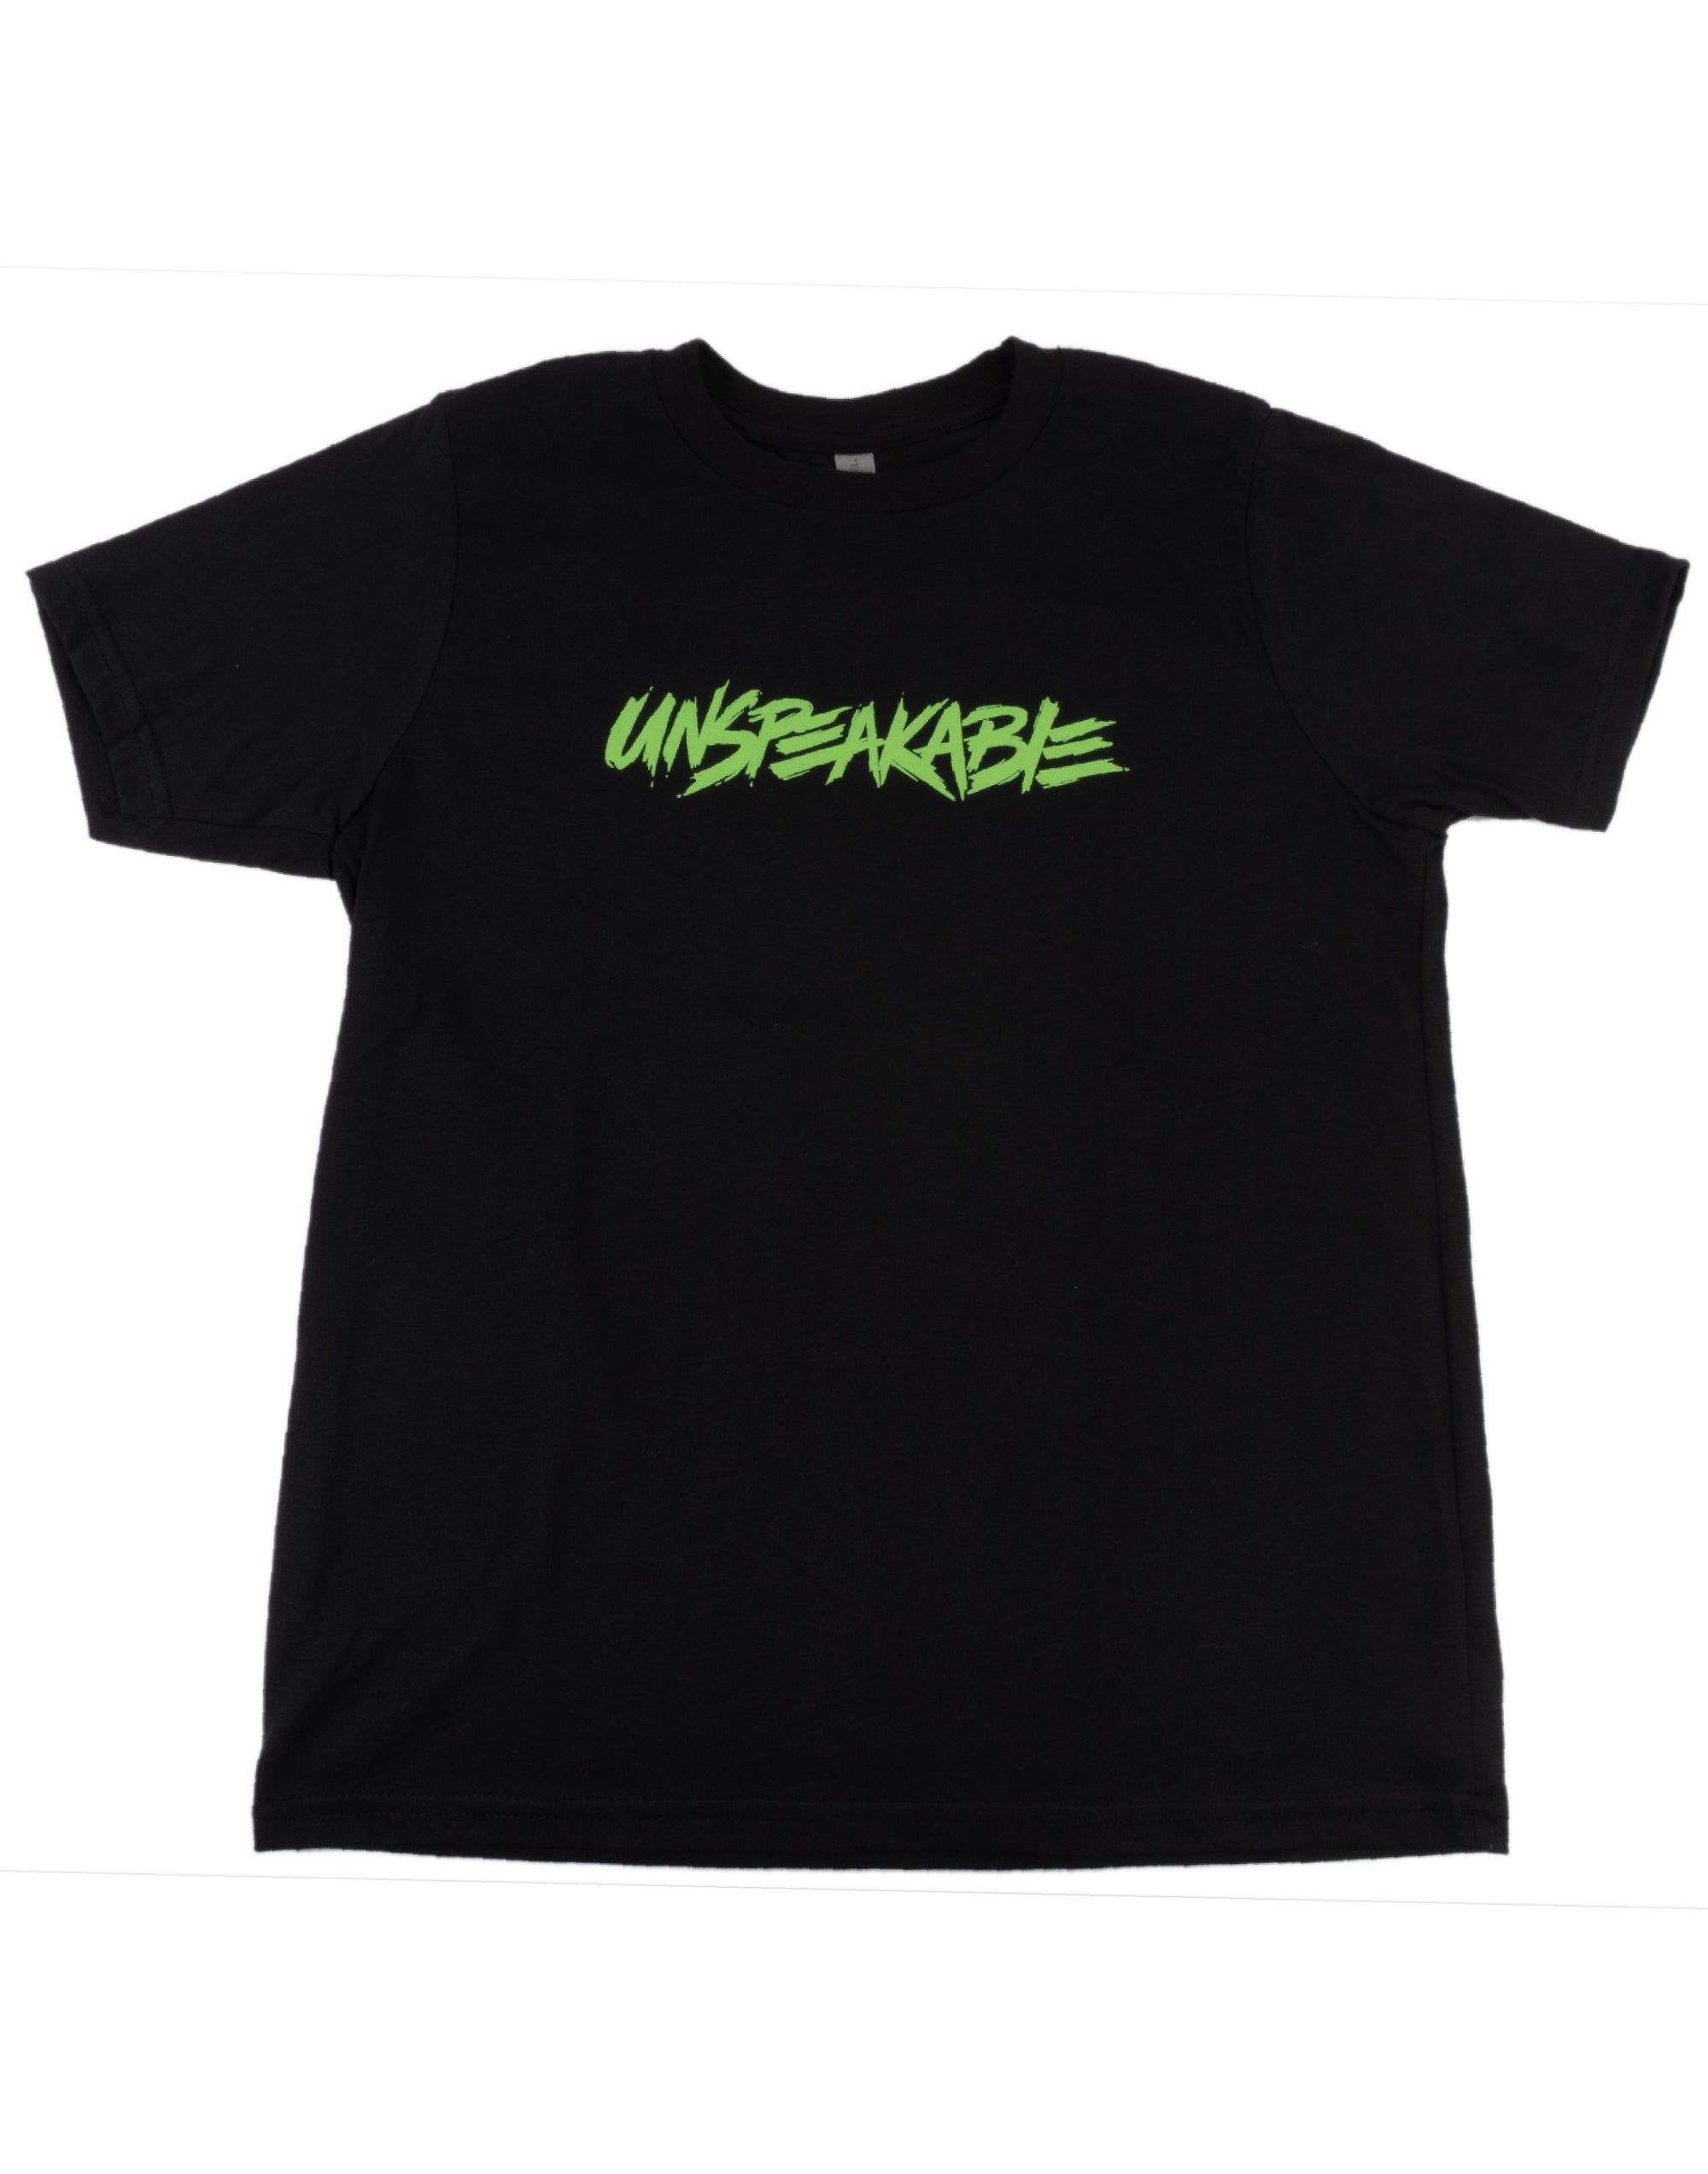 BLACK T-SHIRT WITH NEON GREEN FONT - UnspeakableGaming